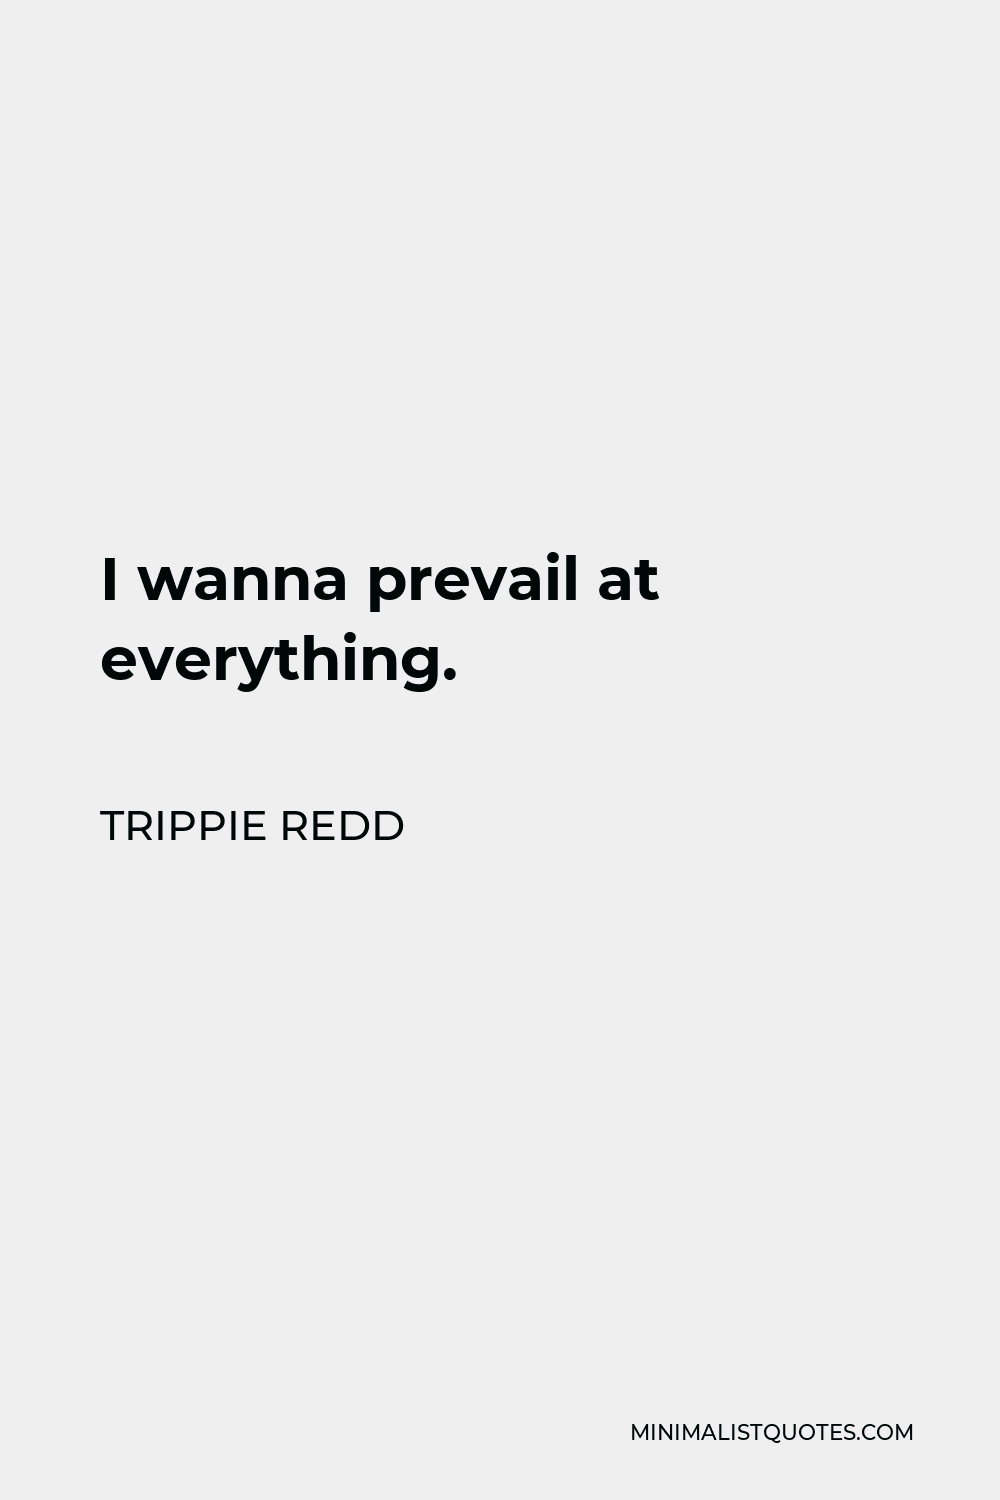 Trippie Redd Quote - I wanna prevail at everything.